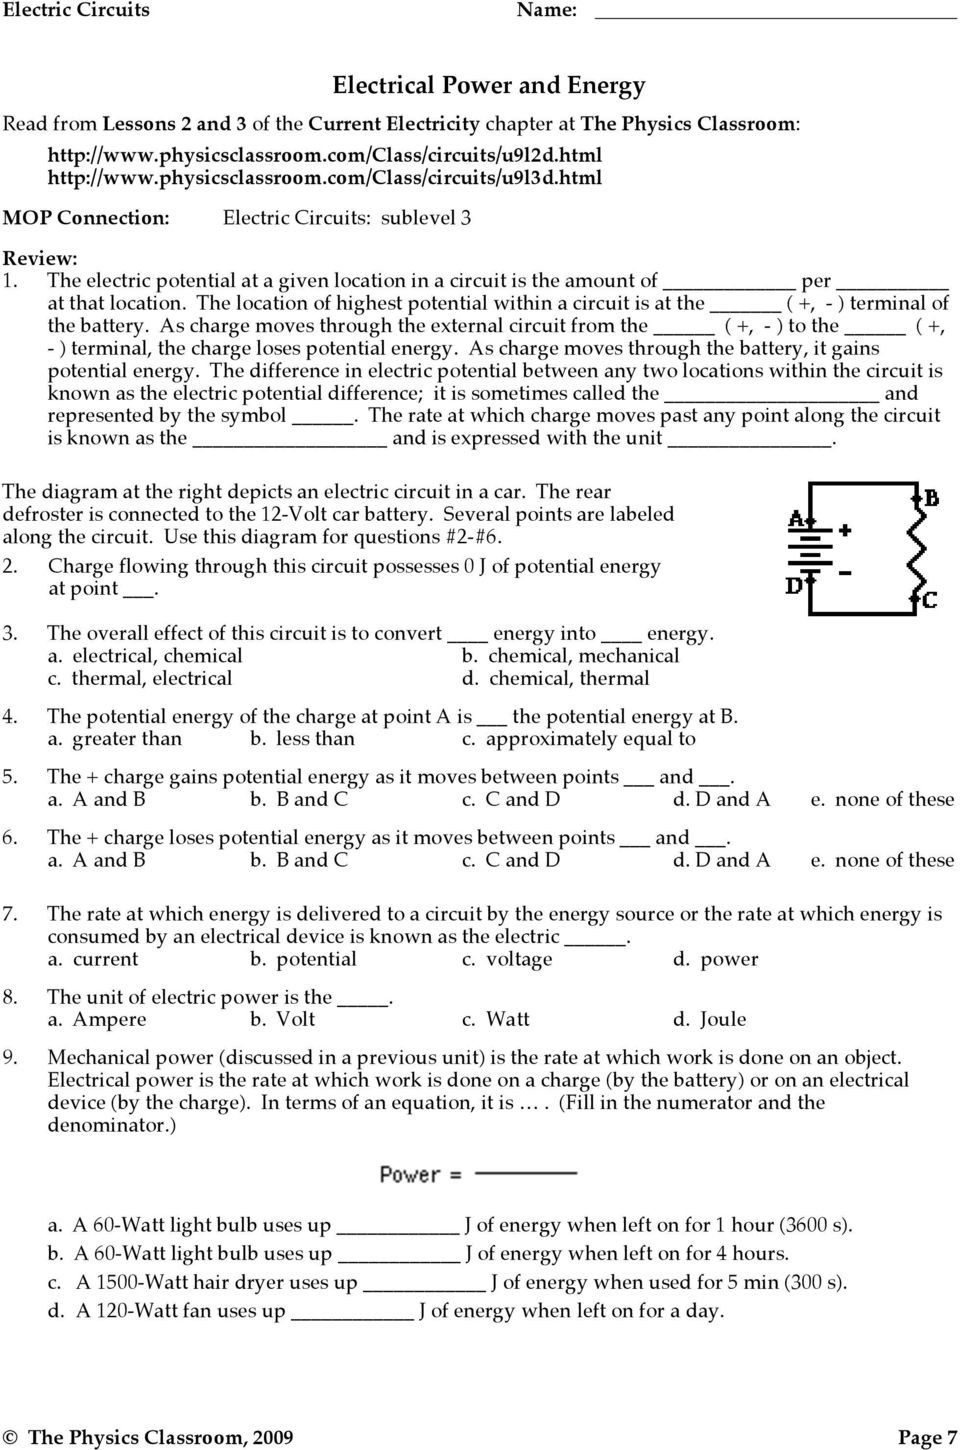 Electrical Power Worksheet Answers Electrical Power and Energy Worksheet Answers Energy Etfs